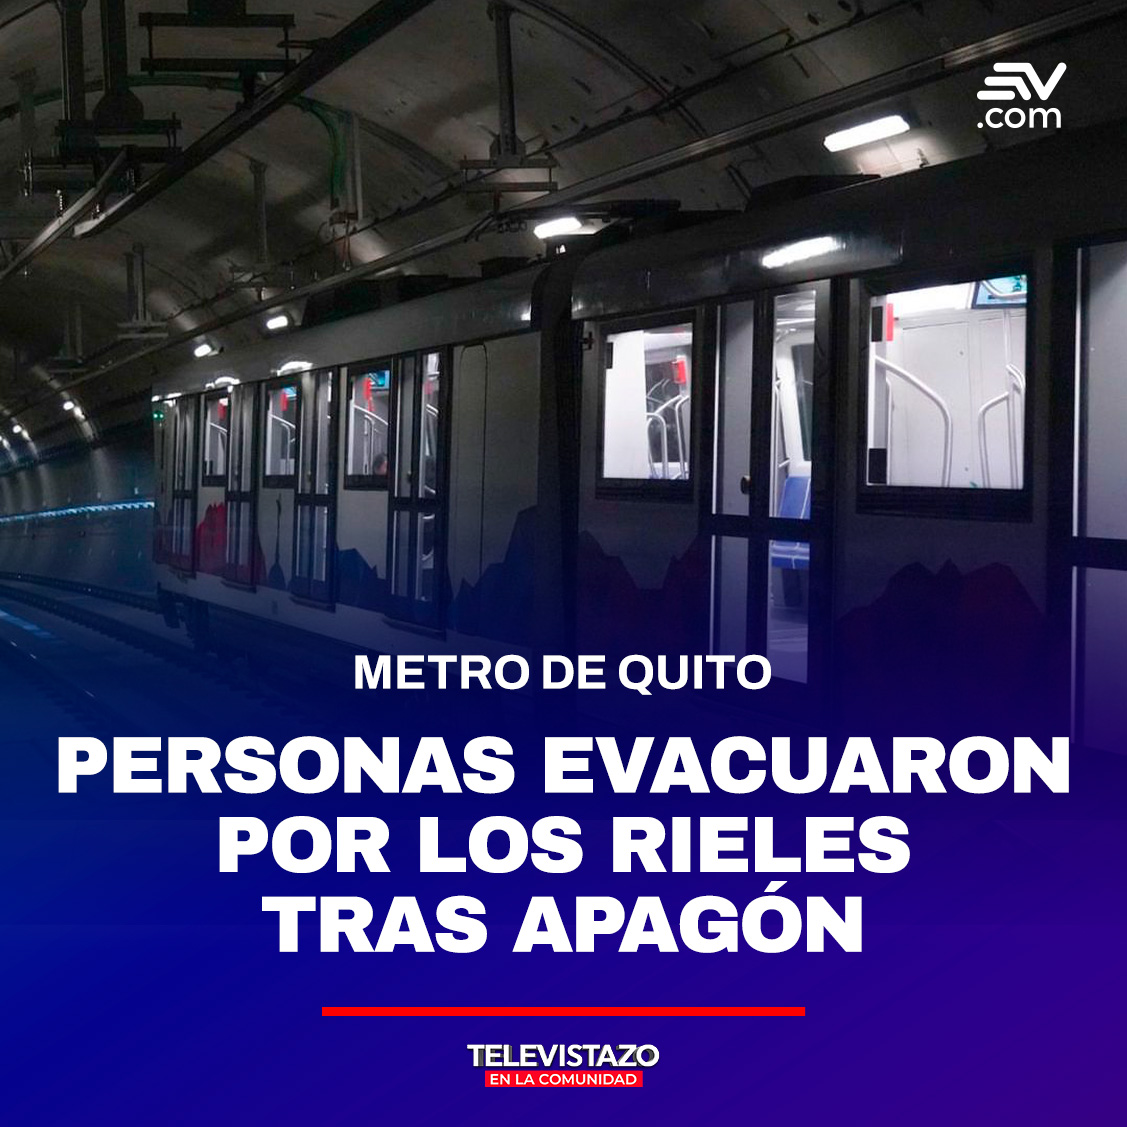 Around 7:00 p.m., the Quito Metropolitan Metro Company confirmed that the transportation system is now operating normally